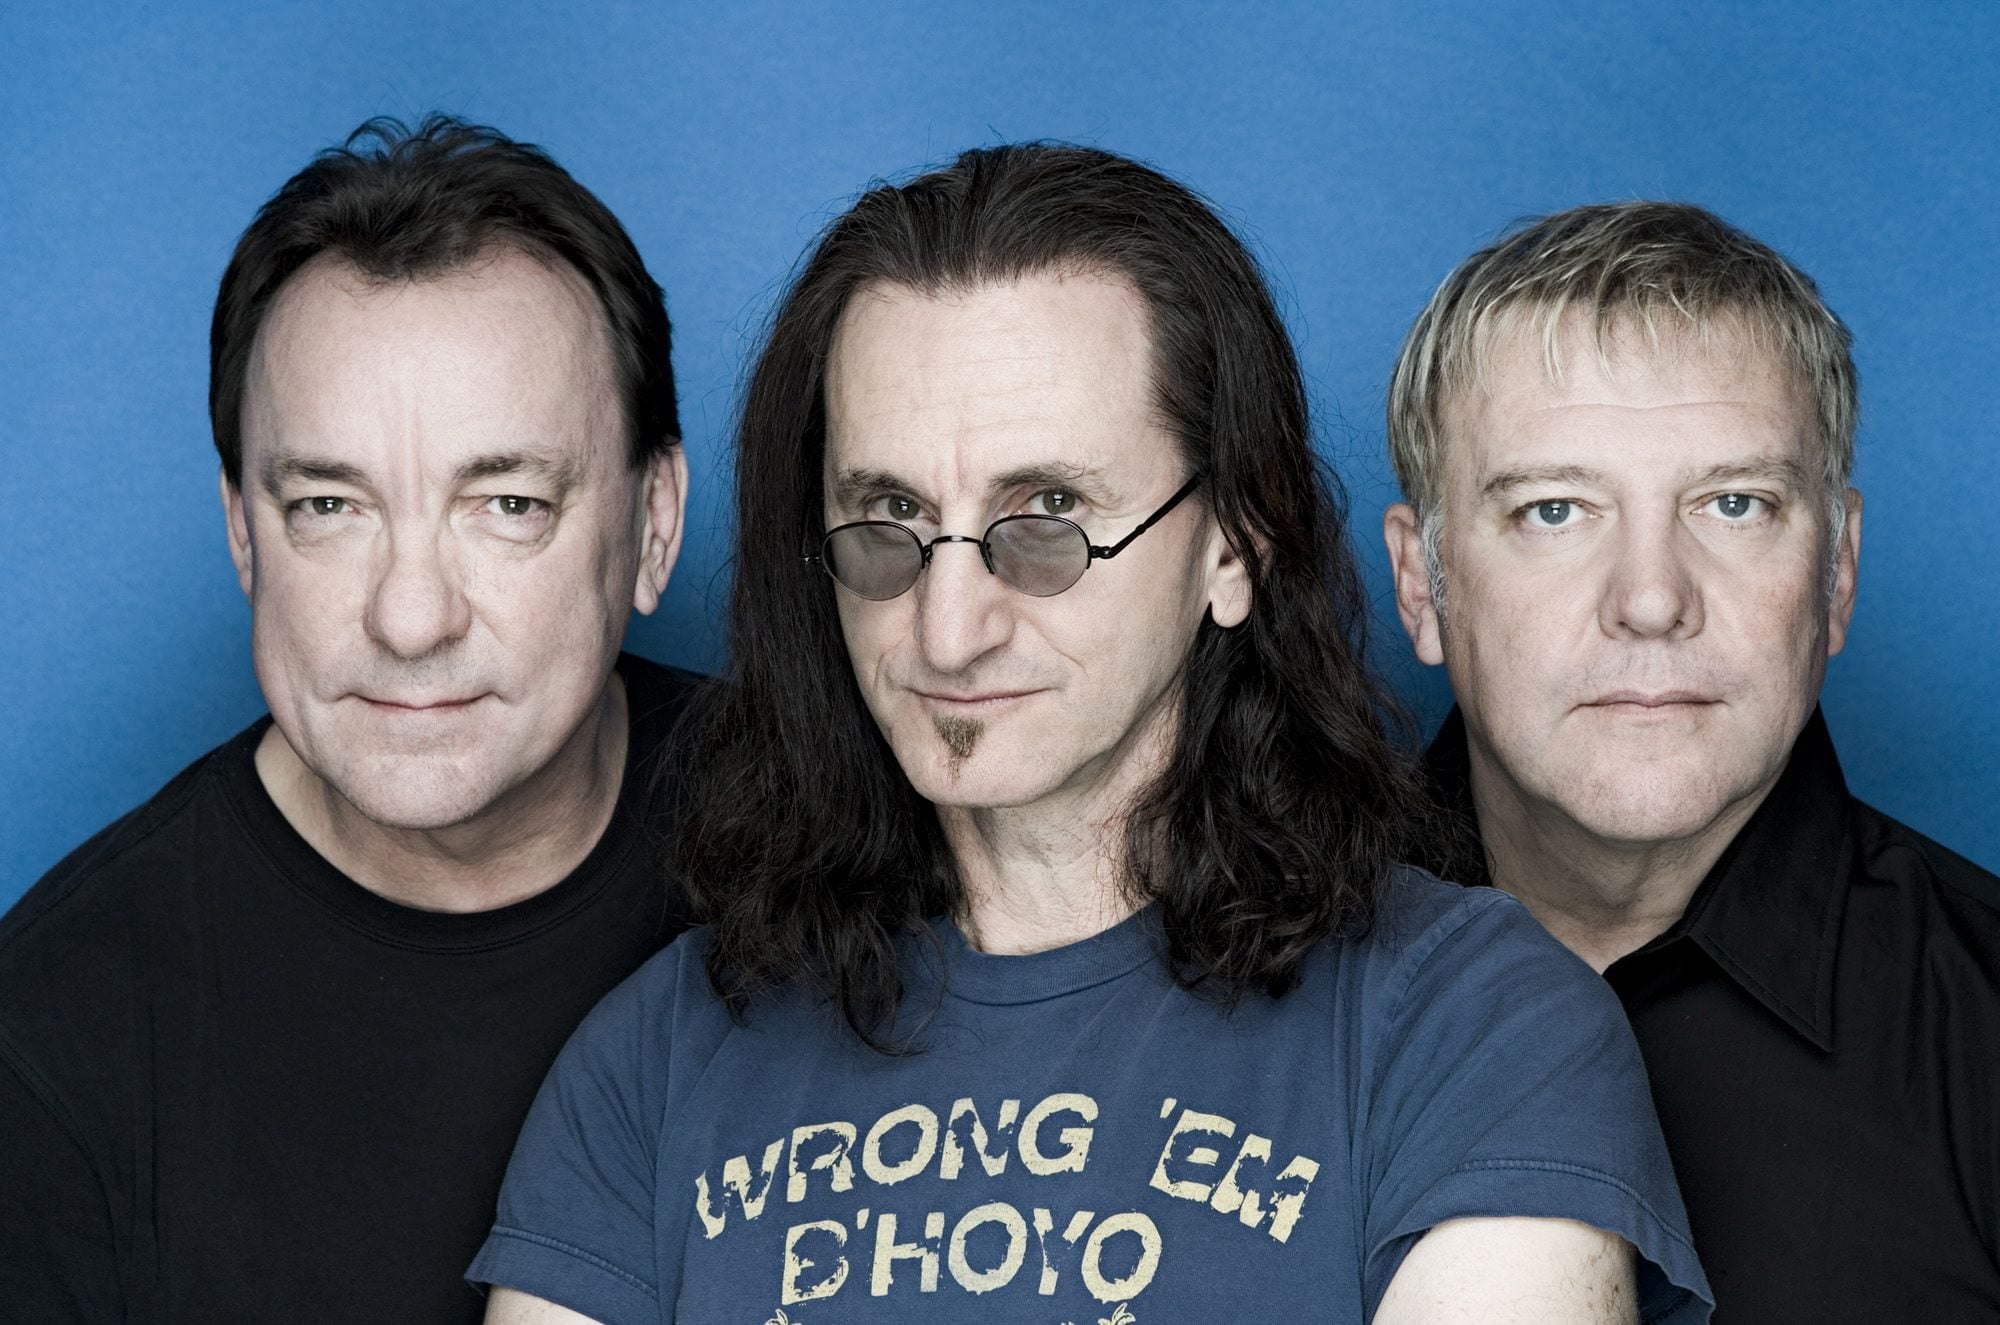 Rush will perform on June 28 at the Sleep Country Amphitheater in Ridgefield.